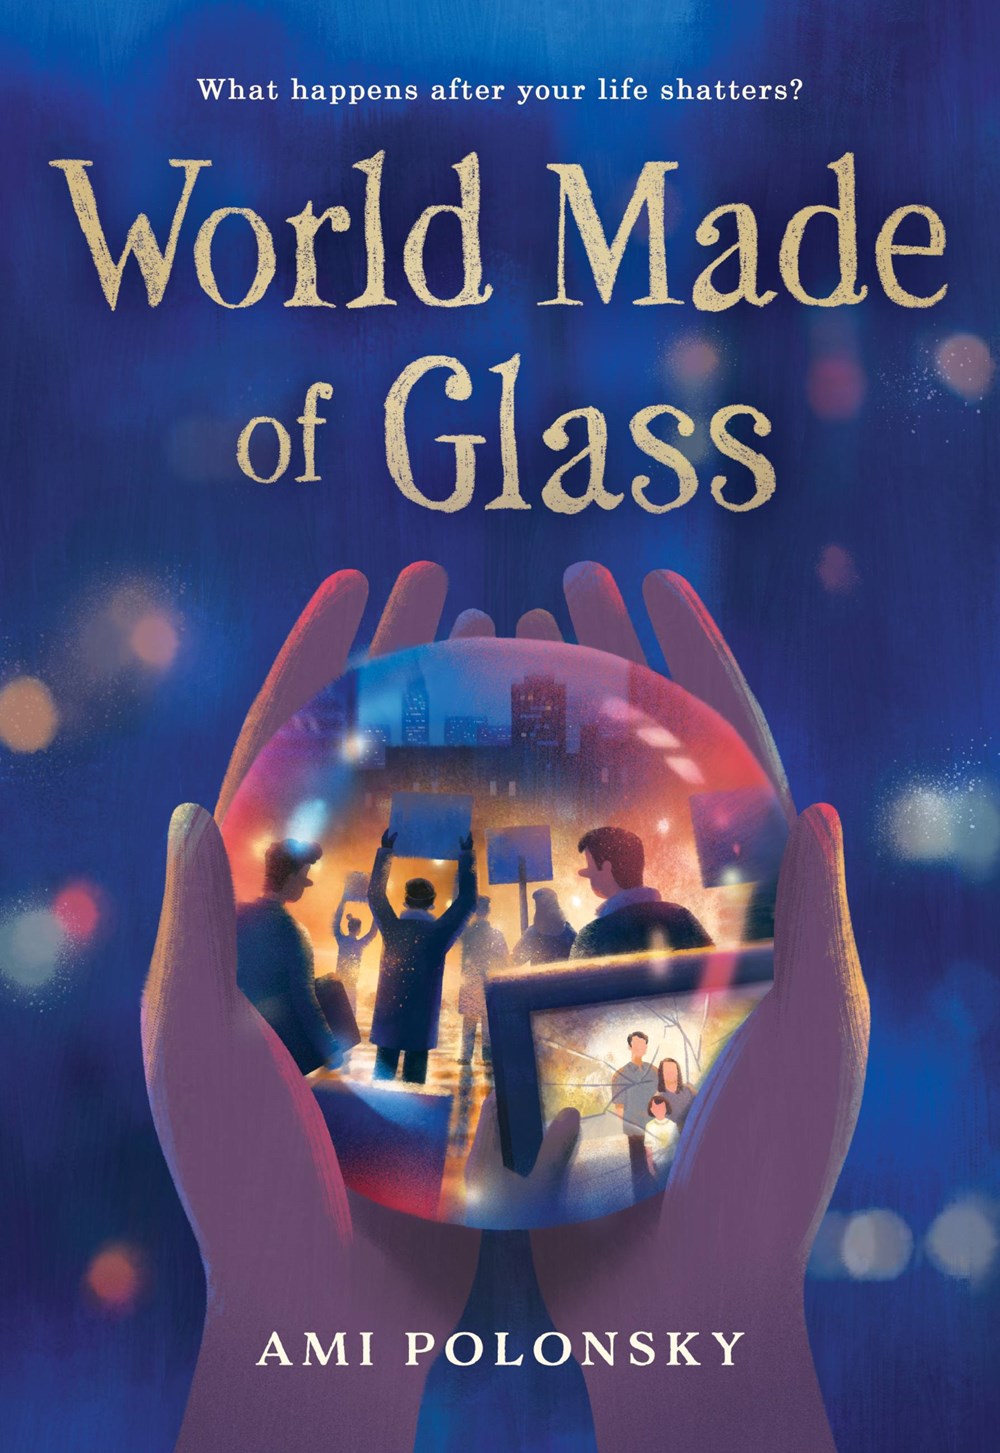 World Made of Glass by Ami Polonsky